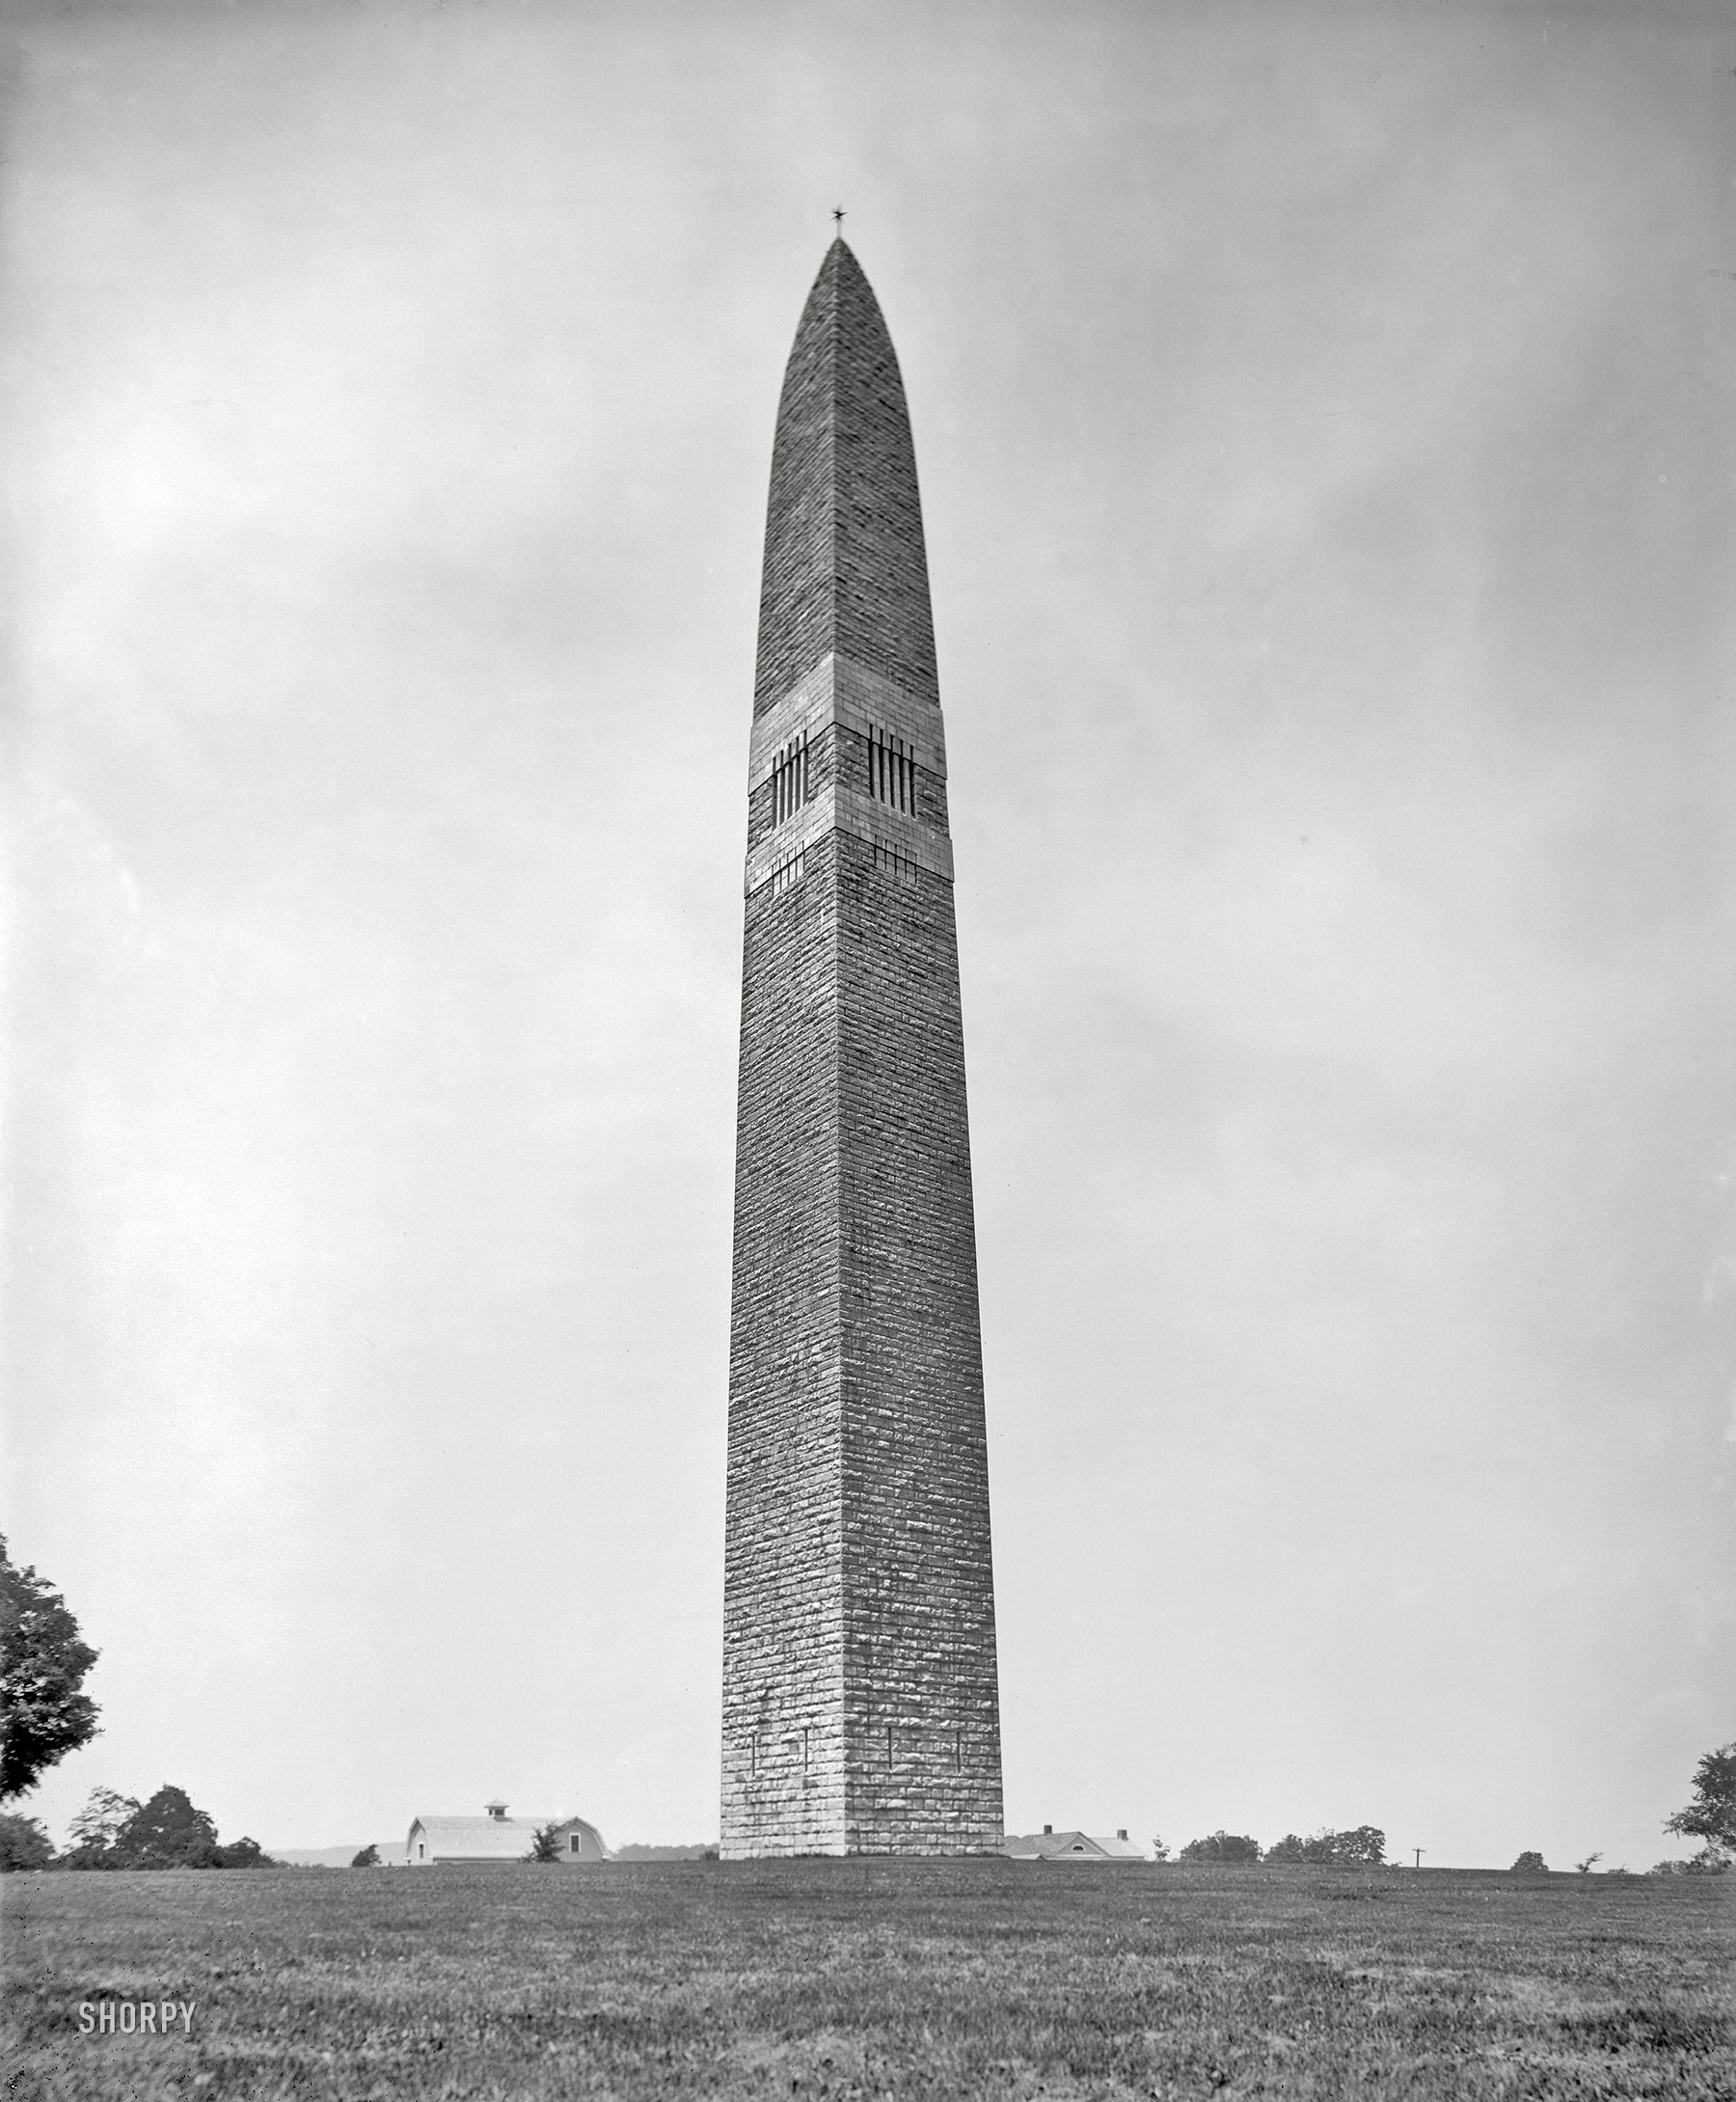 Bennington, Vermont, circa 1905. "Monument commemorating Battle of Bennington -- Walmscock, N.Y., 1777." Not pictured: reflecting pool shaped like an ashtray. 8x10 glass negative, Detroit Publishing Co. View full size.